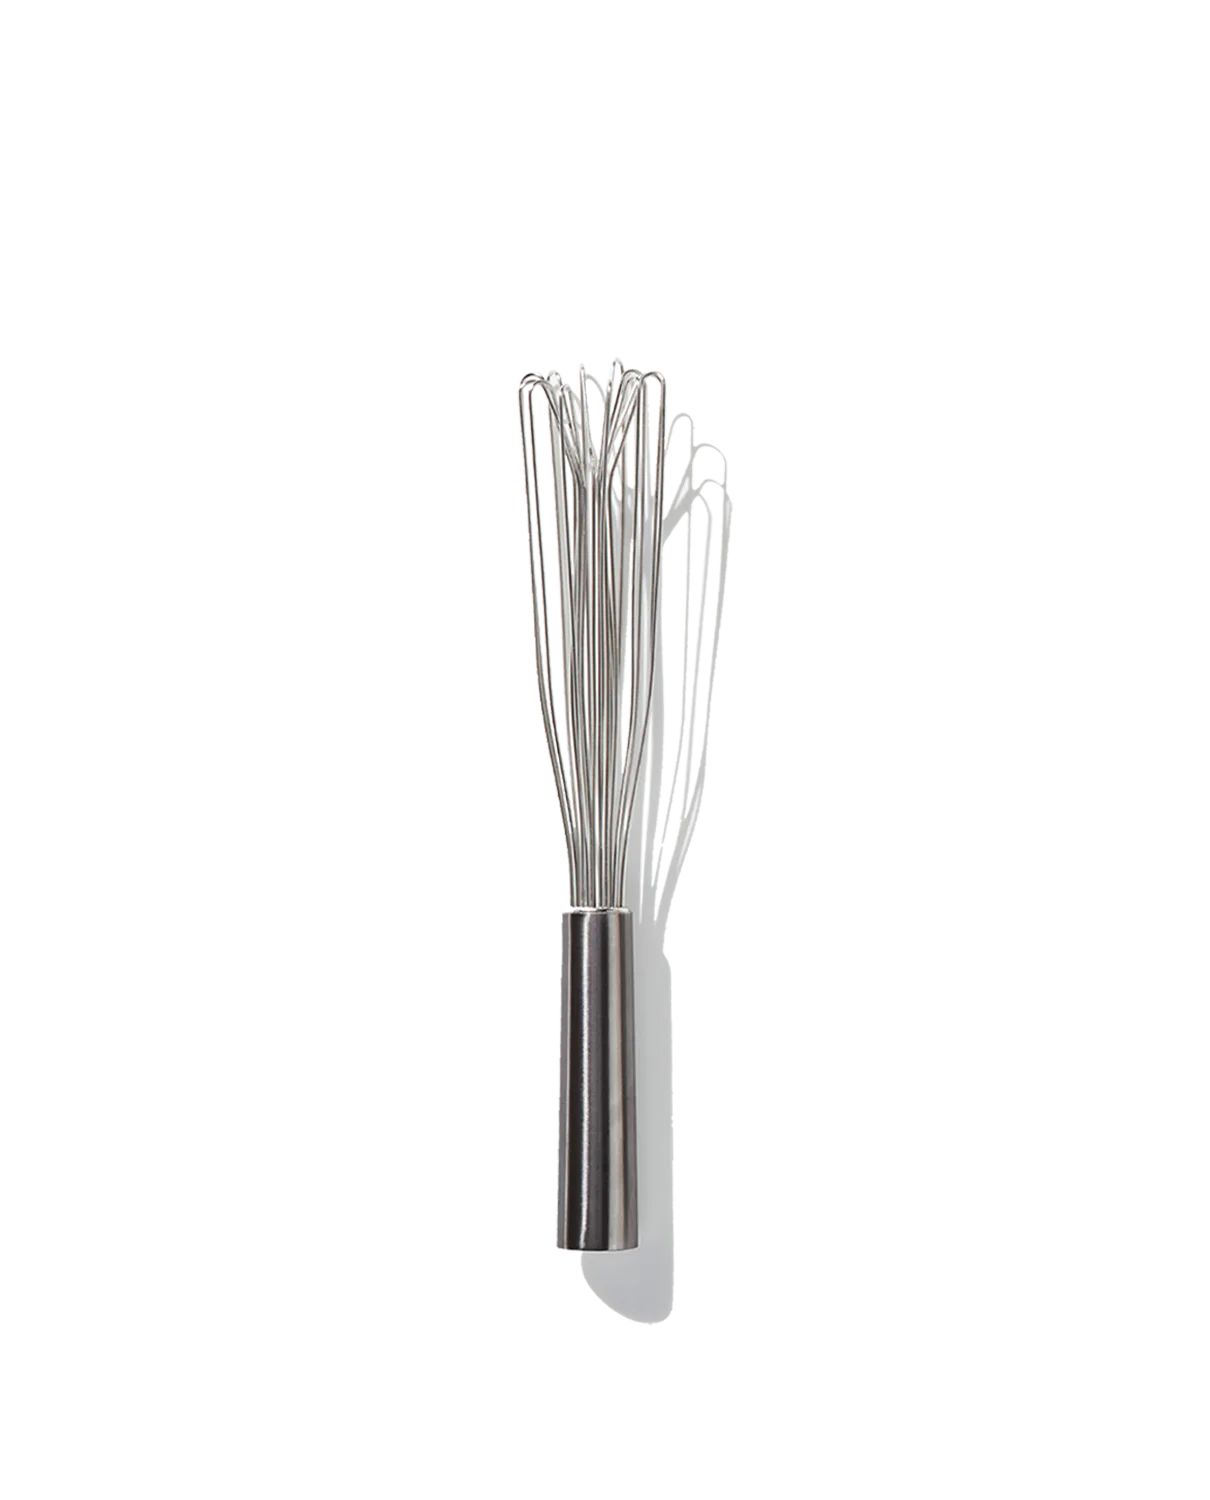 The Air Whisk | Material